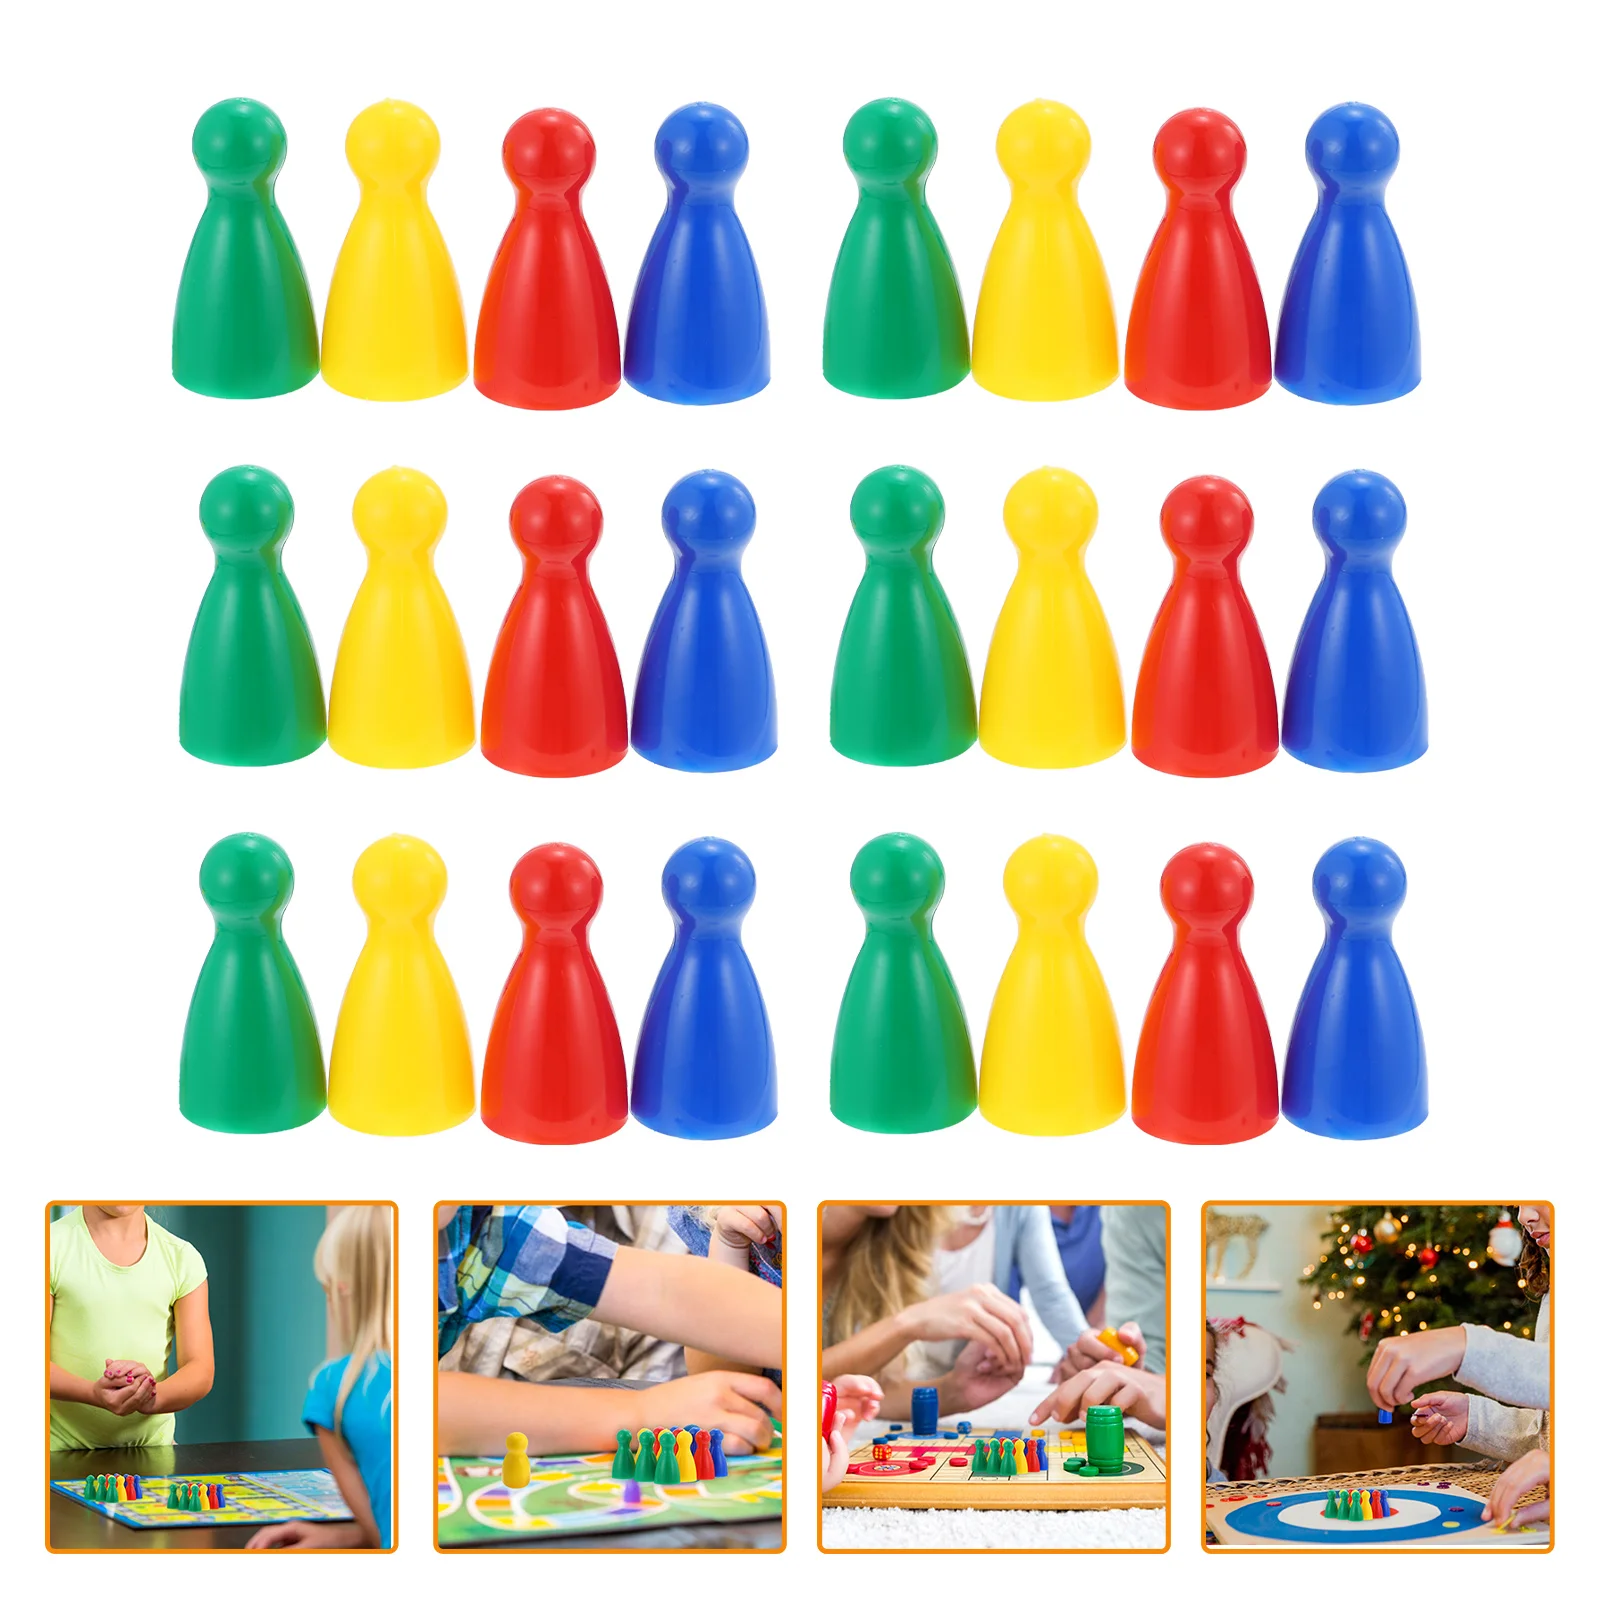 

Chess Pieces Game Board Pawns Plastic Flight Set Pawn Chessman Parcheesi Ludo Dice Accessory Chinese Kit Pegs Desktop Games